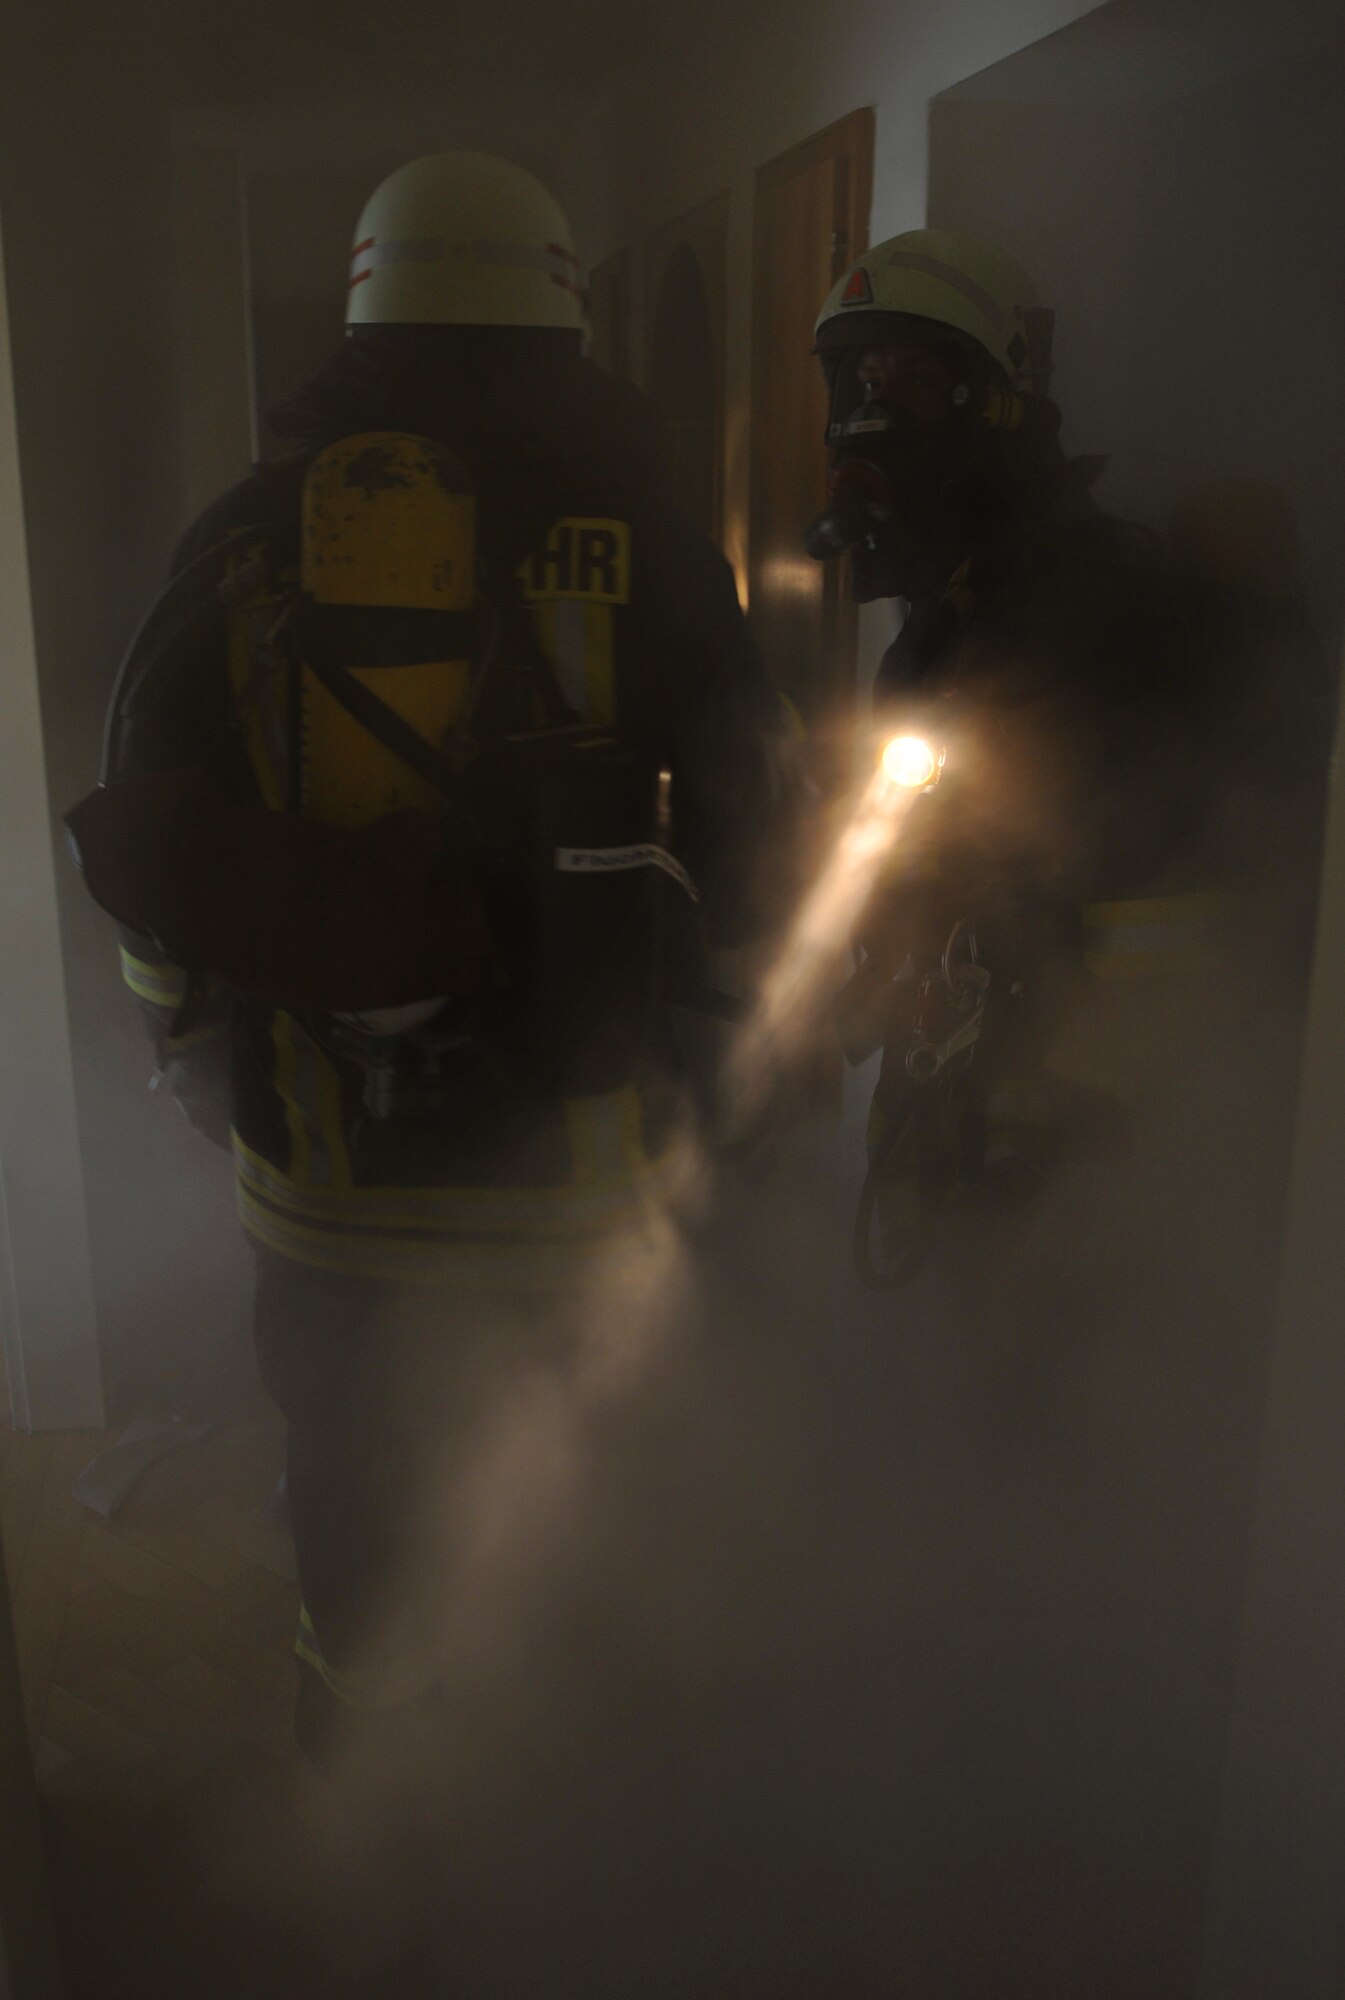 SPANGDAHLEM AIR BASE, Germany – Firefighters from the Bitburg Freiwilige Feuerwehr fire department respond to a simulated building fire during a mutual aid exercise at Bitburg Annex April 11. The exercise tested the 52nd Fighter Wing and Bitburg Freiwilige Feuerwehr fire departments’ ability to work together and respond to real-world fire emergencies. (U.S. Air Force photo/Airman 1st Class Nick Wilson)